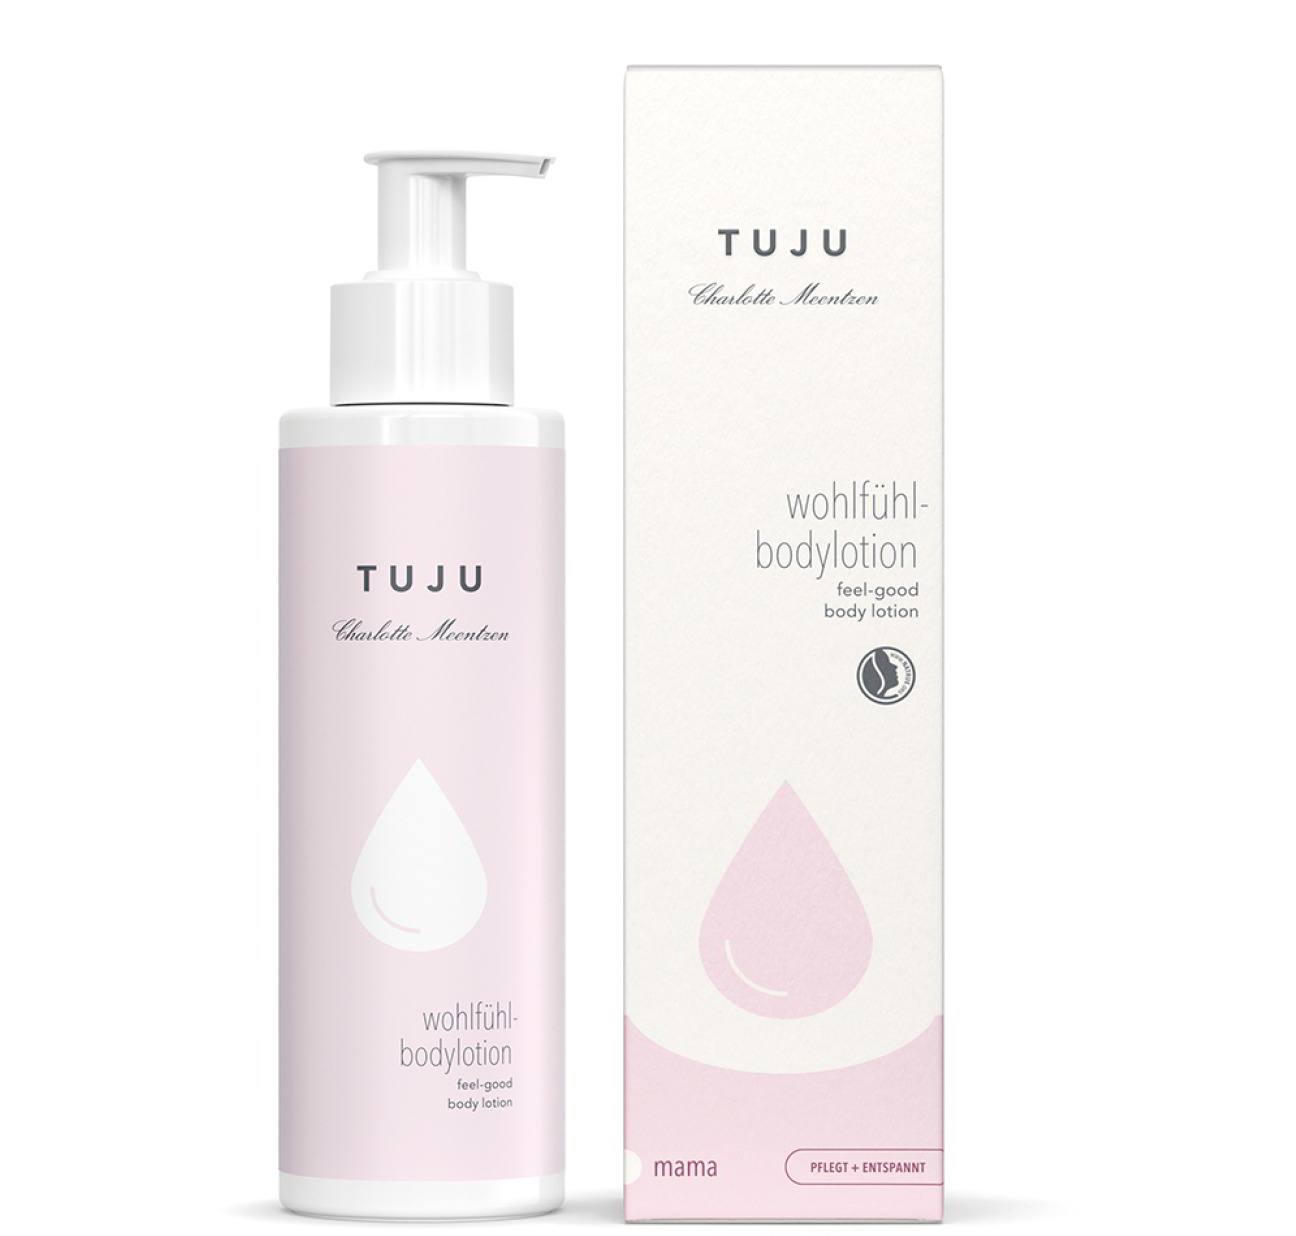 TUJU Feel-Good Body Lotion For a relaxing yet fast care routine